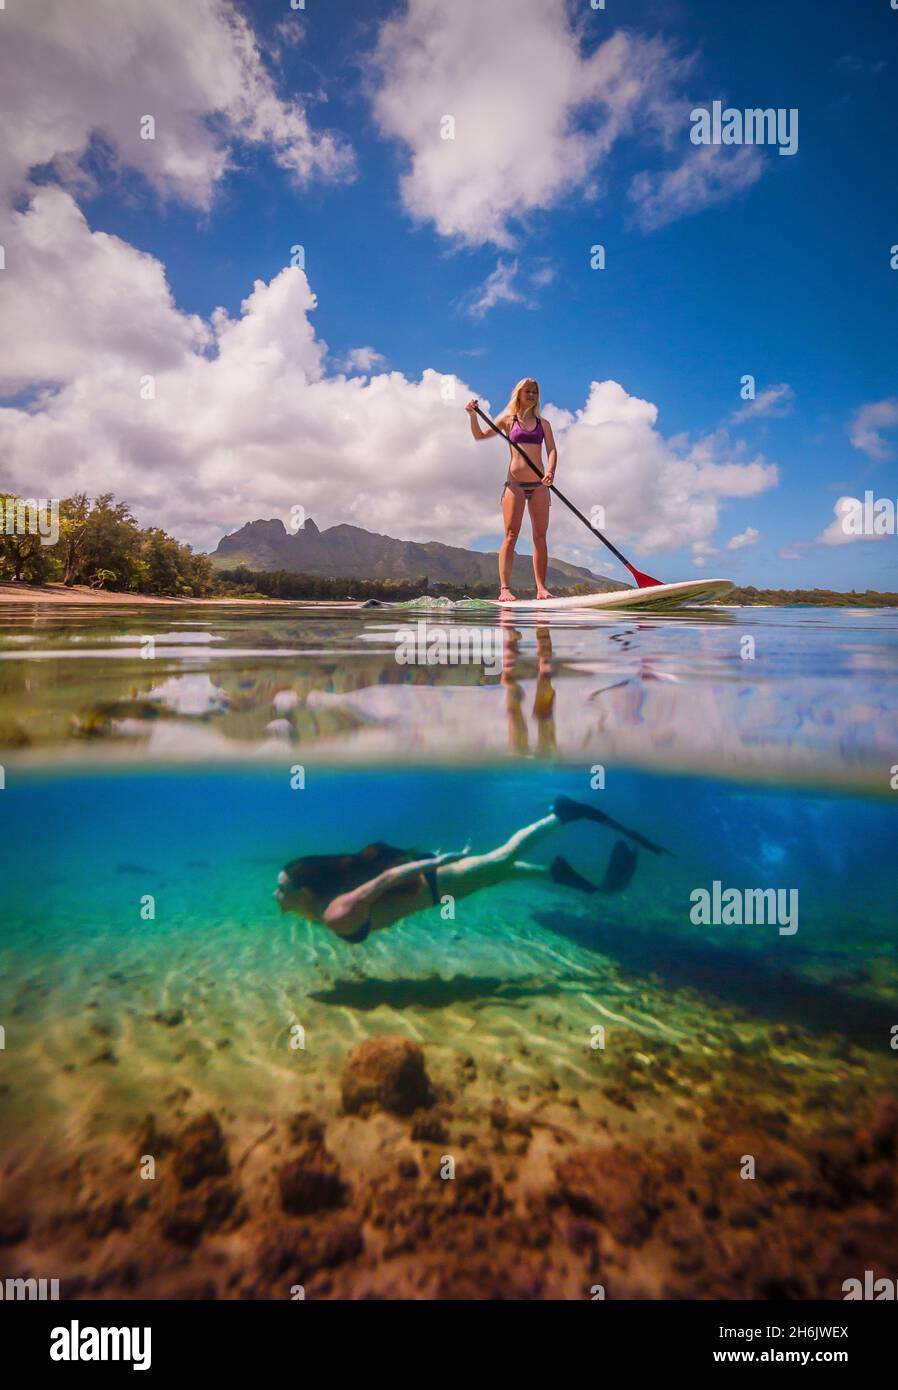 An athletic woman rides a stand-up paddle-board as another woman free-dives below her, Hawaii, United States of America, Pacific Stock Photo